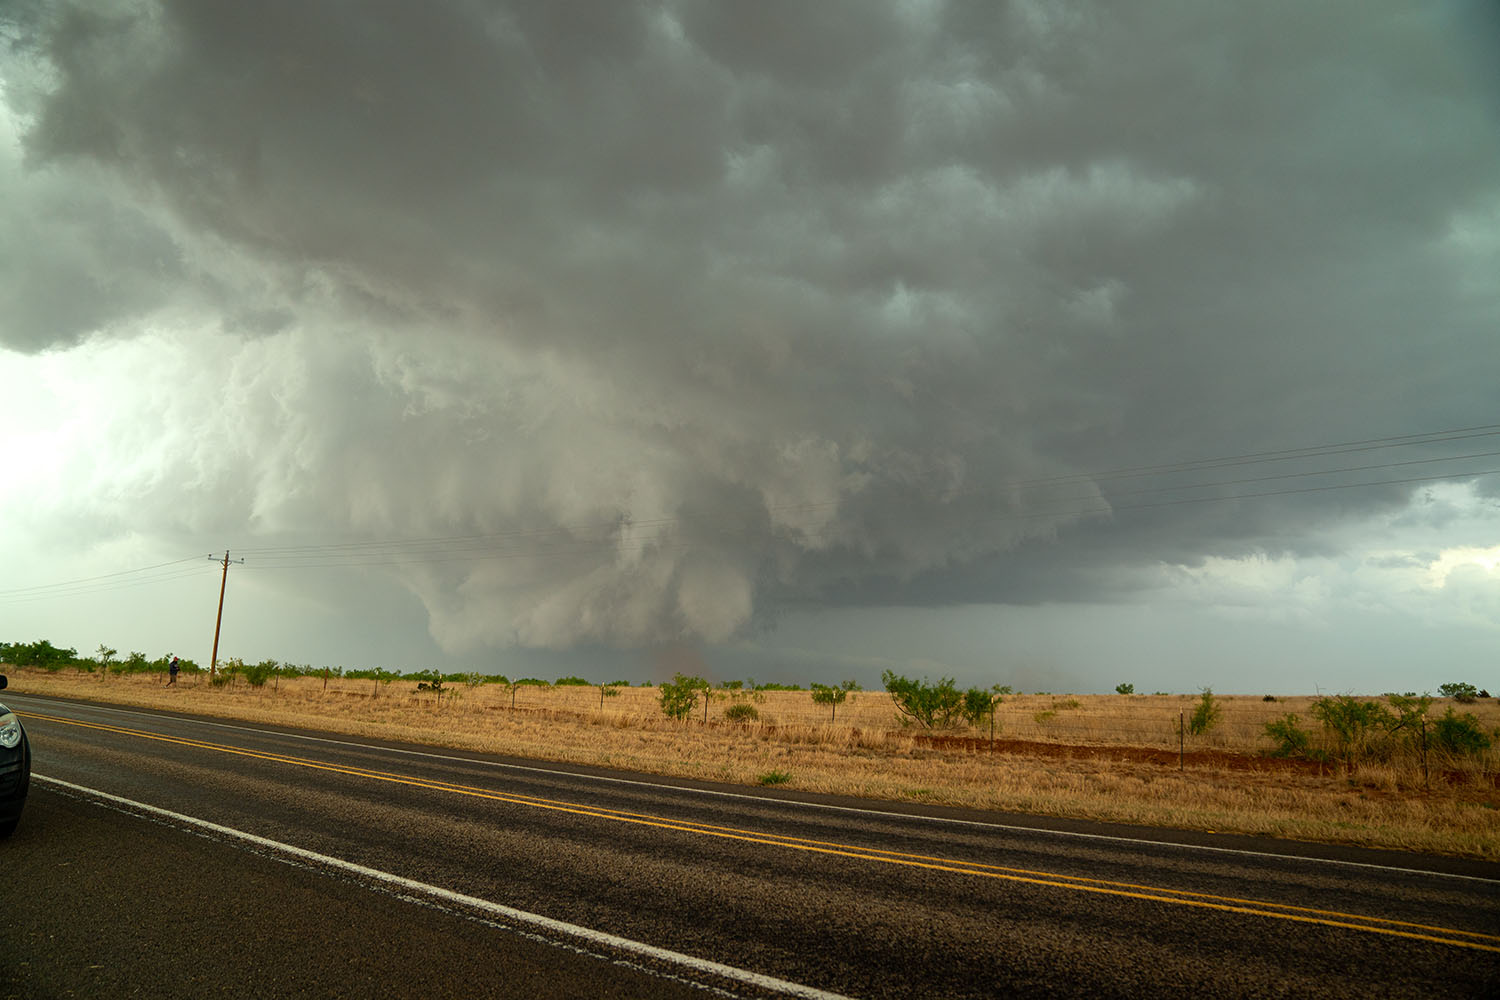 The students traveled to the Central Plains, which covers several states including Oklahoma and Kansas, to study storm weather. This featured storm cell was in Texas.